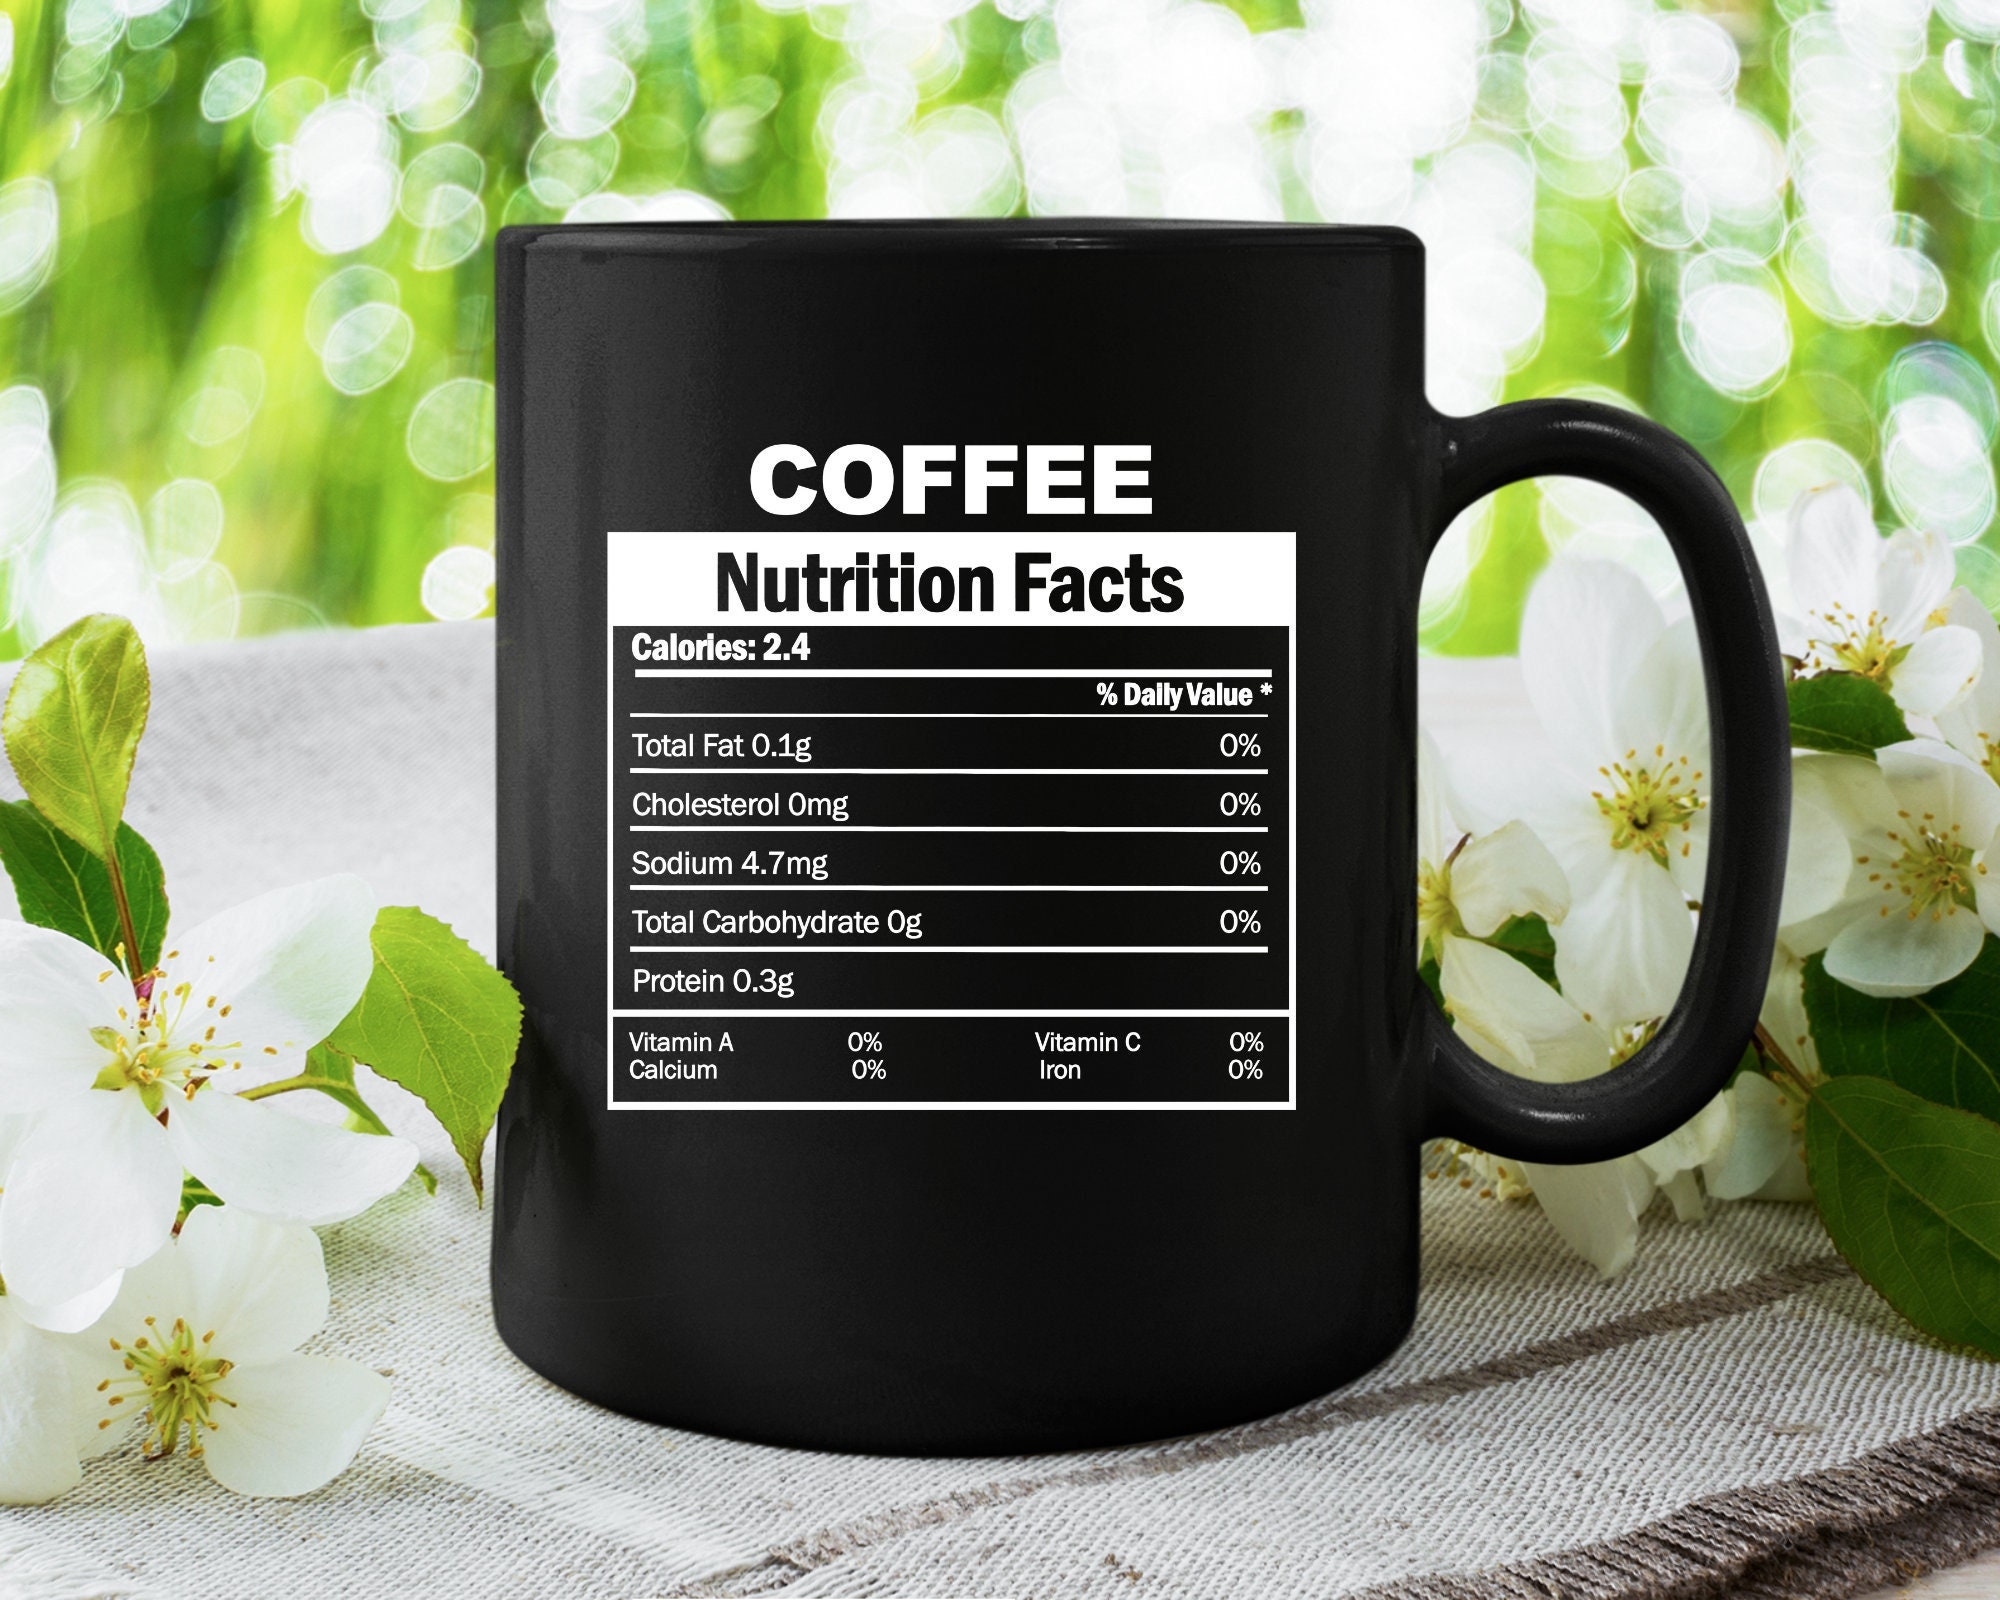 How Many Calories are in a Cup of Coffee?